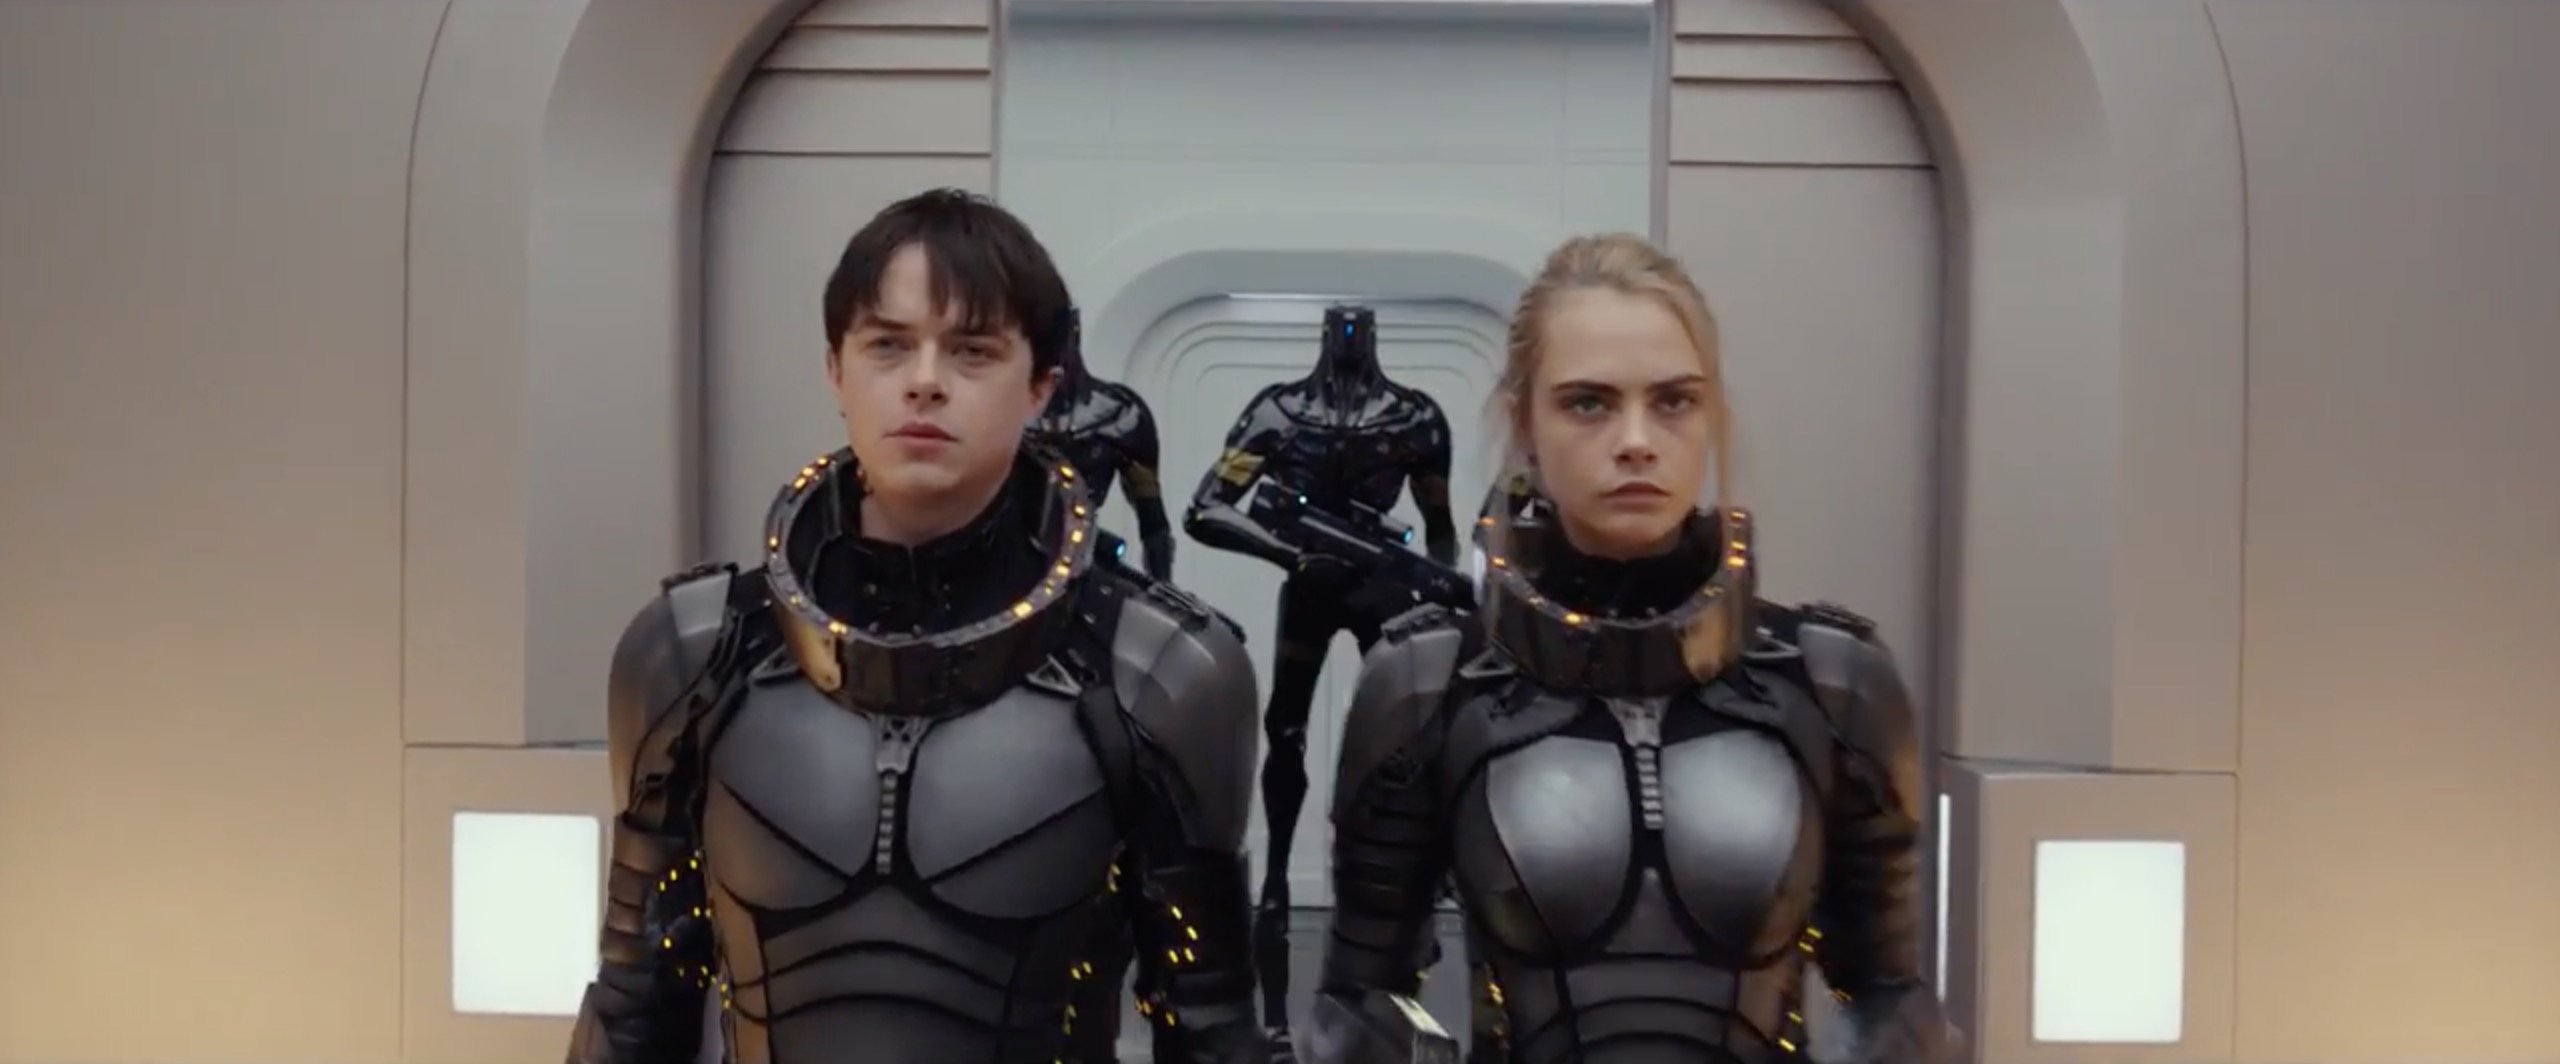 Valerian And The City Of A Thousand Planets HD wallpapers, Desktop wallpaper - most viewed